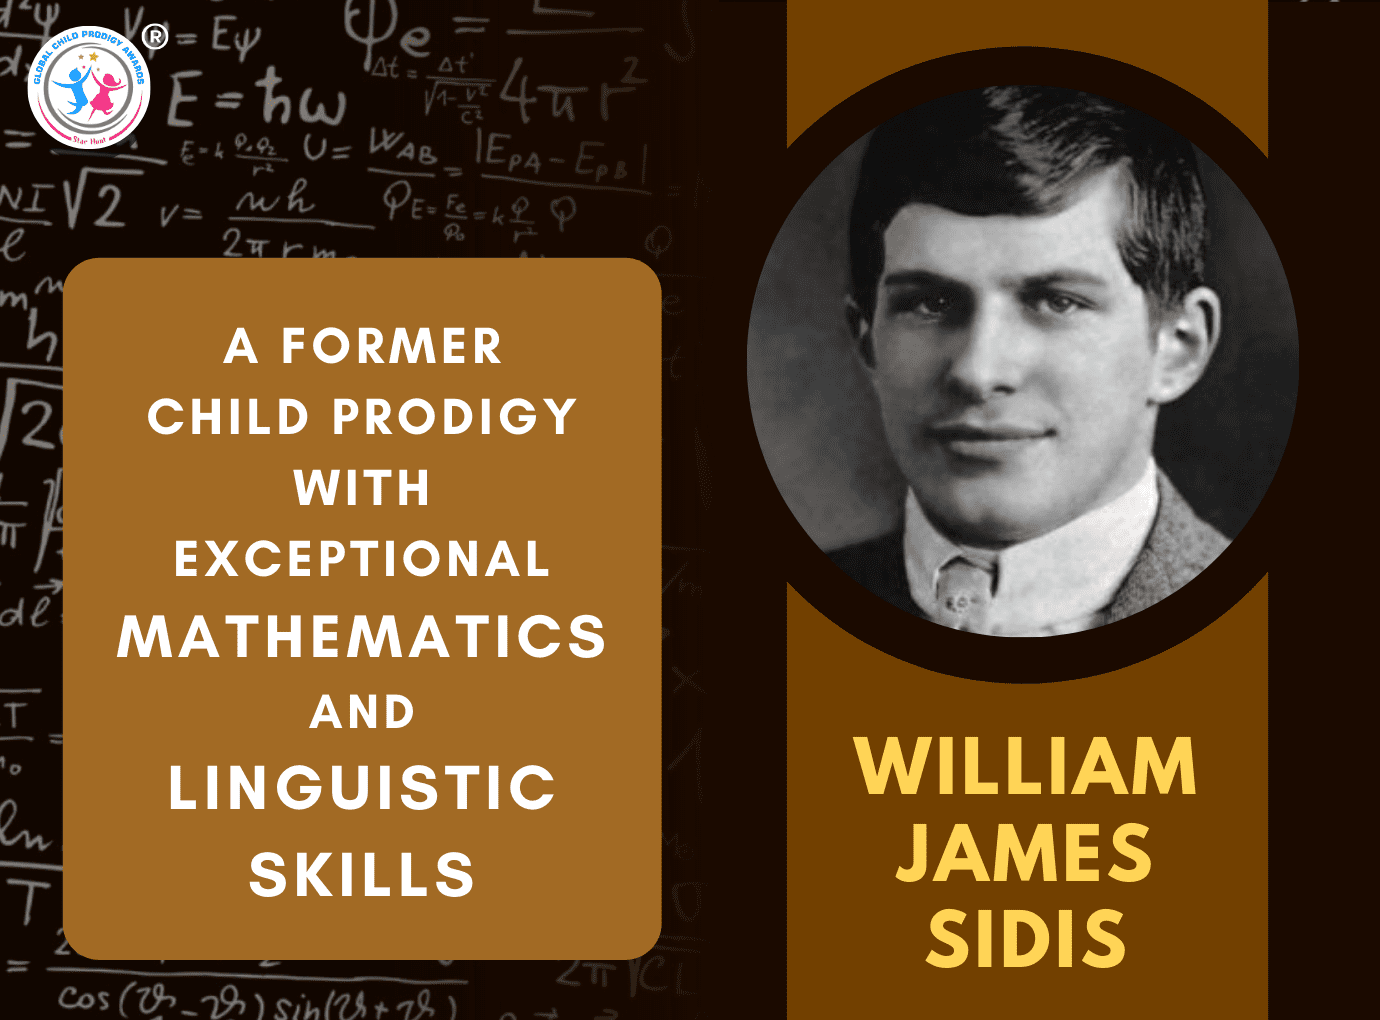 WILLIAM JAMES SIDIS - A Child Prodigy with Exceptional